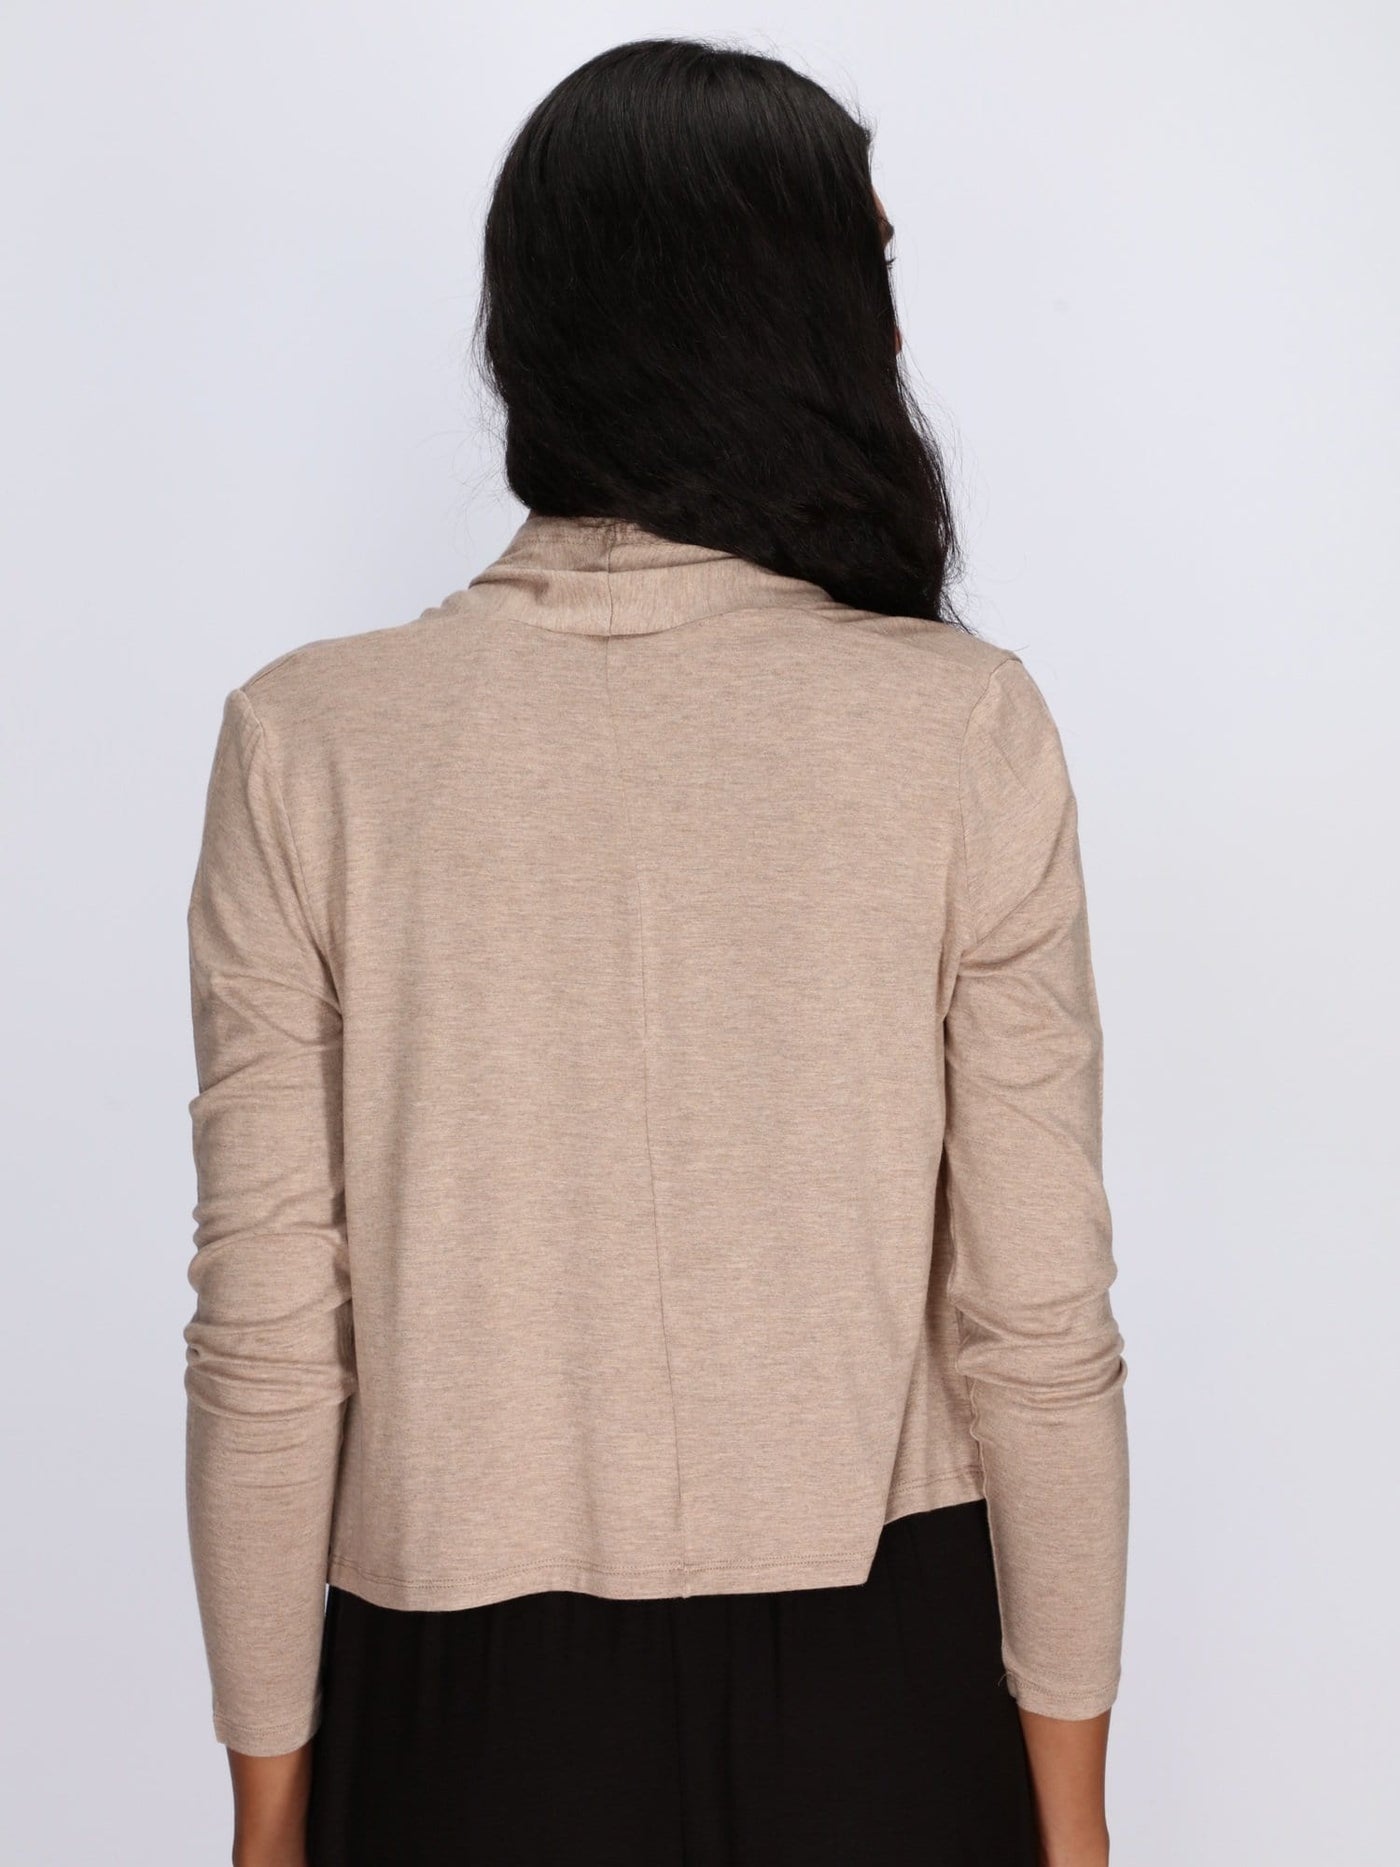 OR Jackets & Cardigans Basic Open Jumper With Long Sleeve